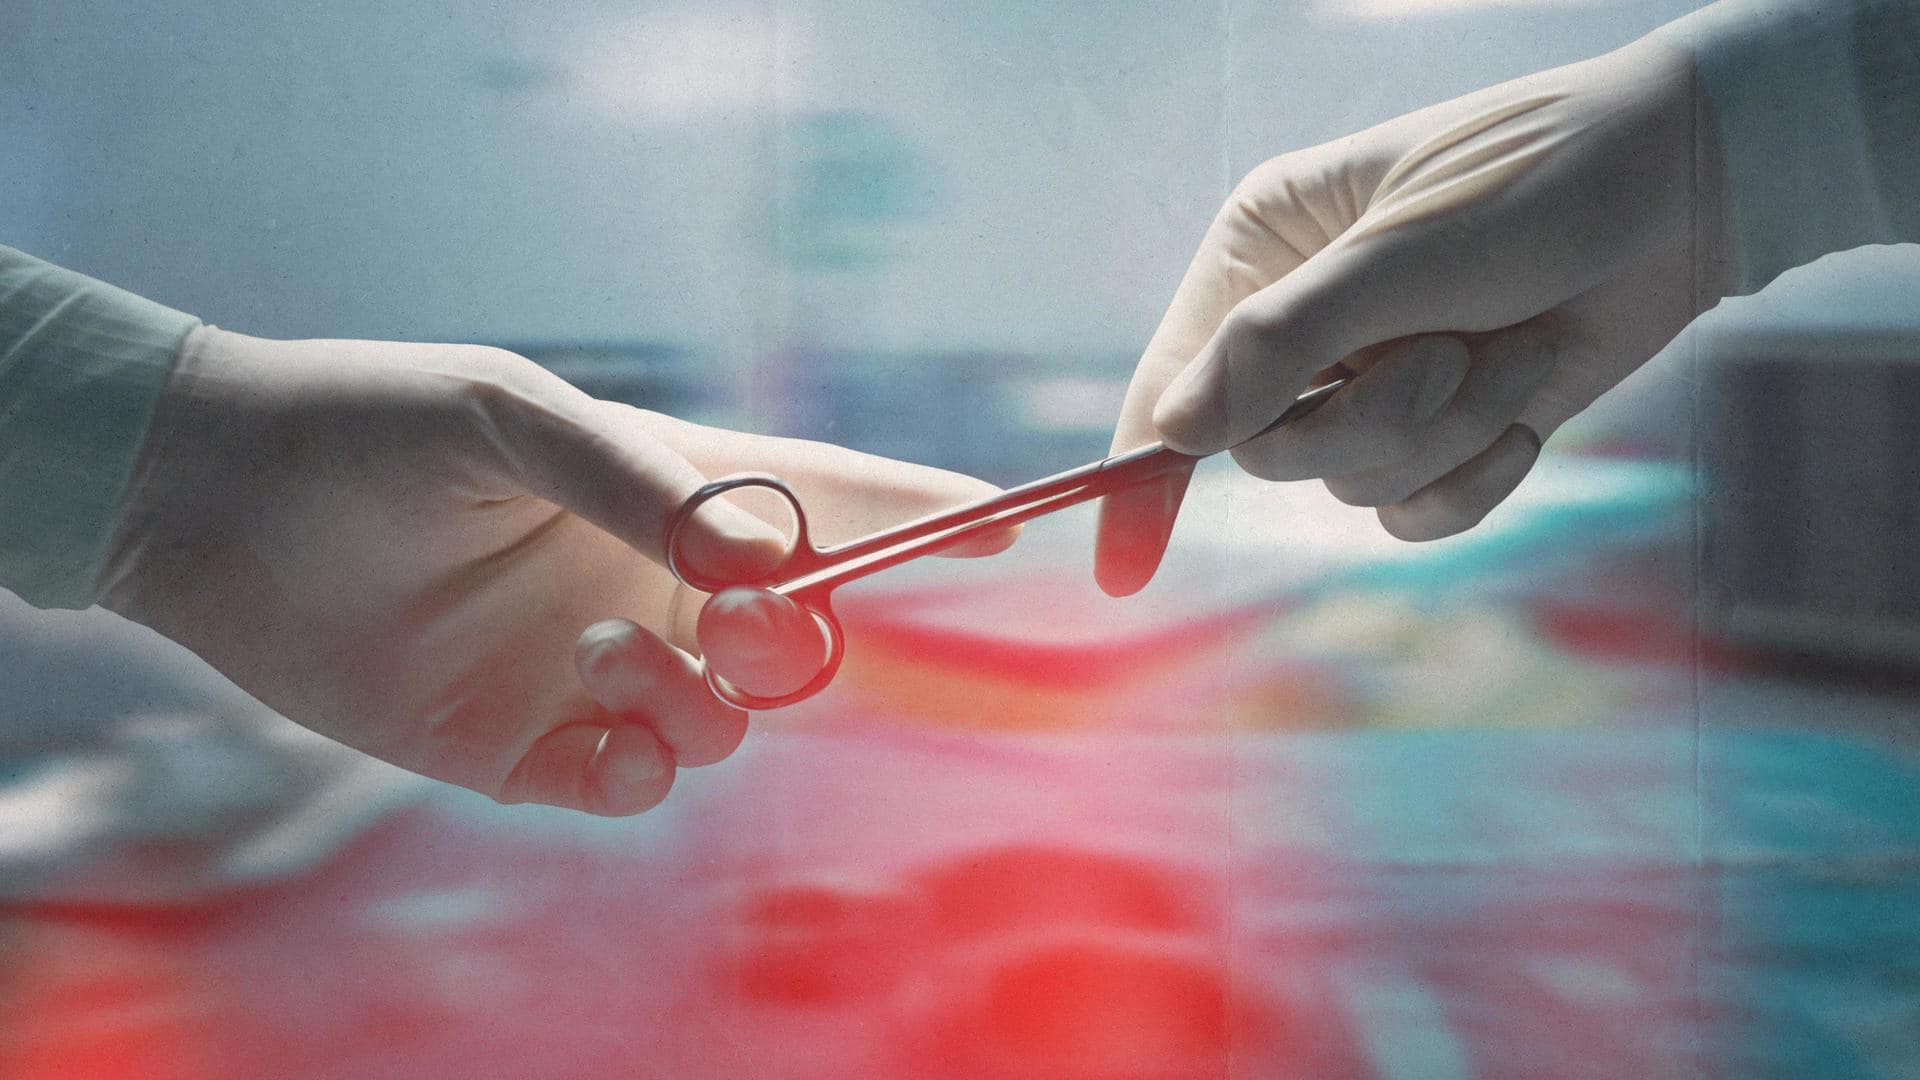 Doctors allegedly leave scissors inside body during surgery, patient dead